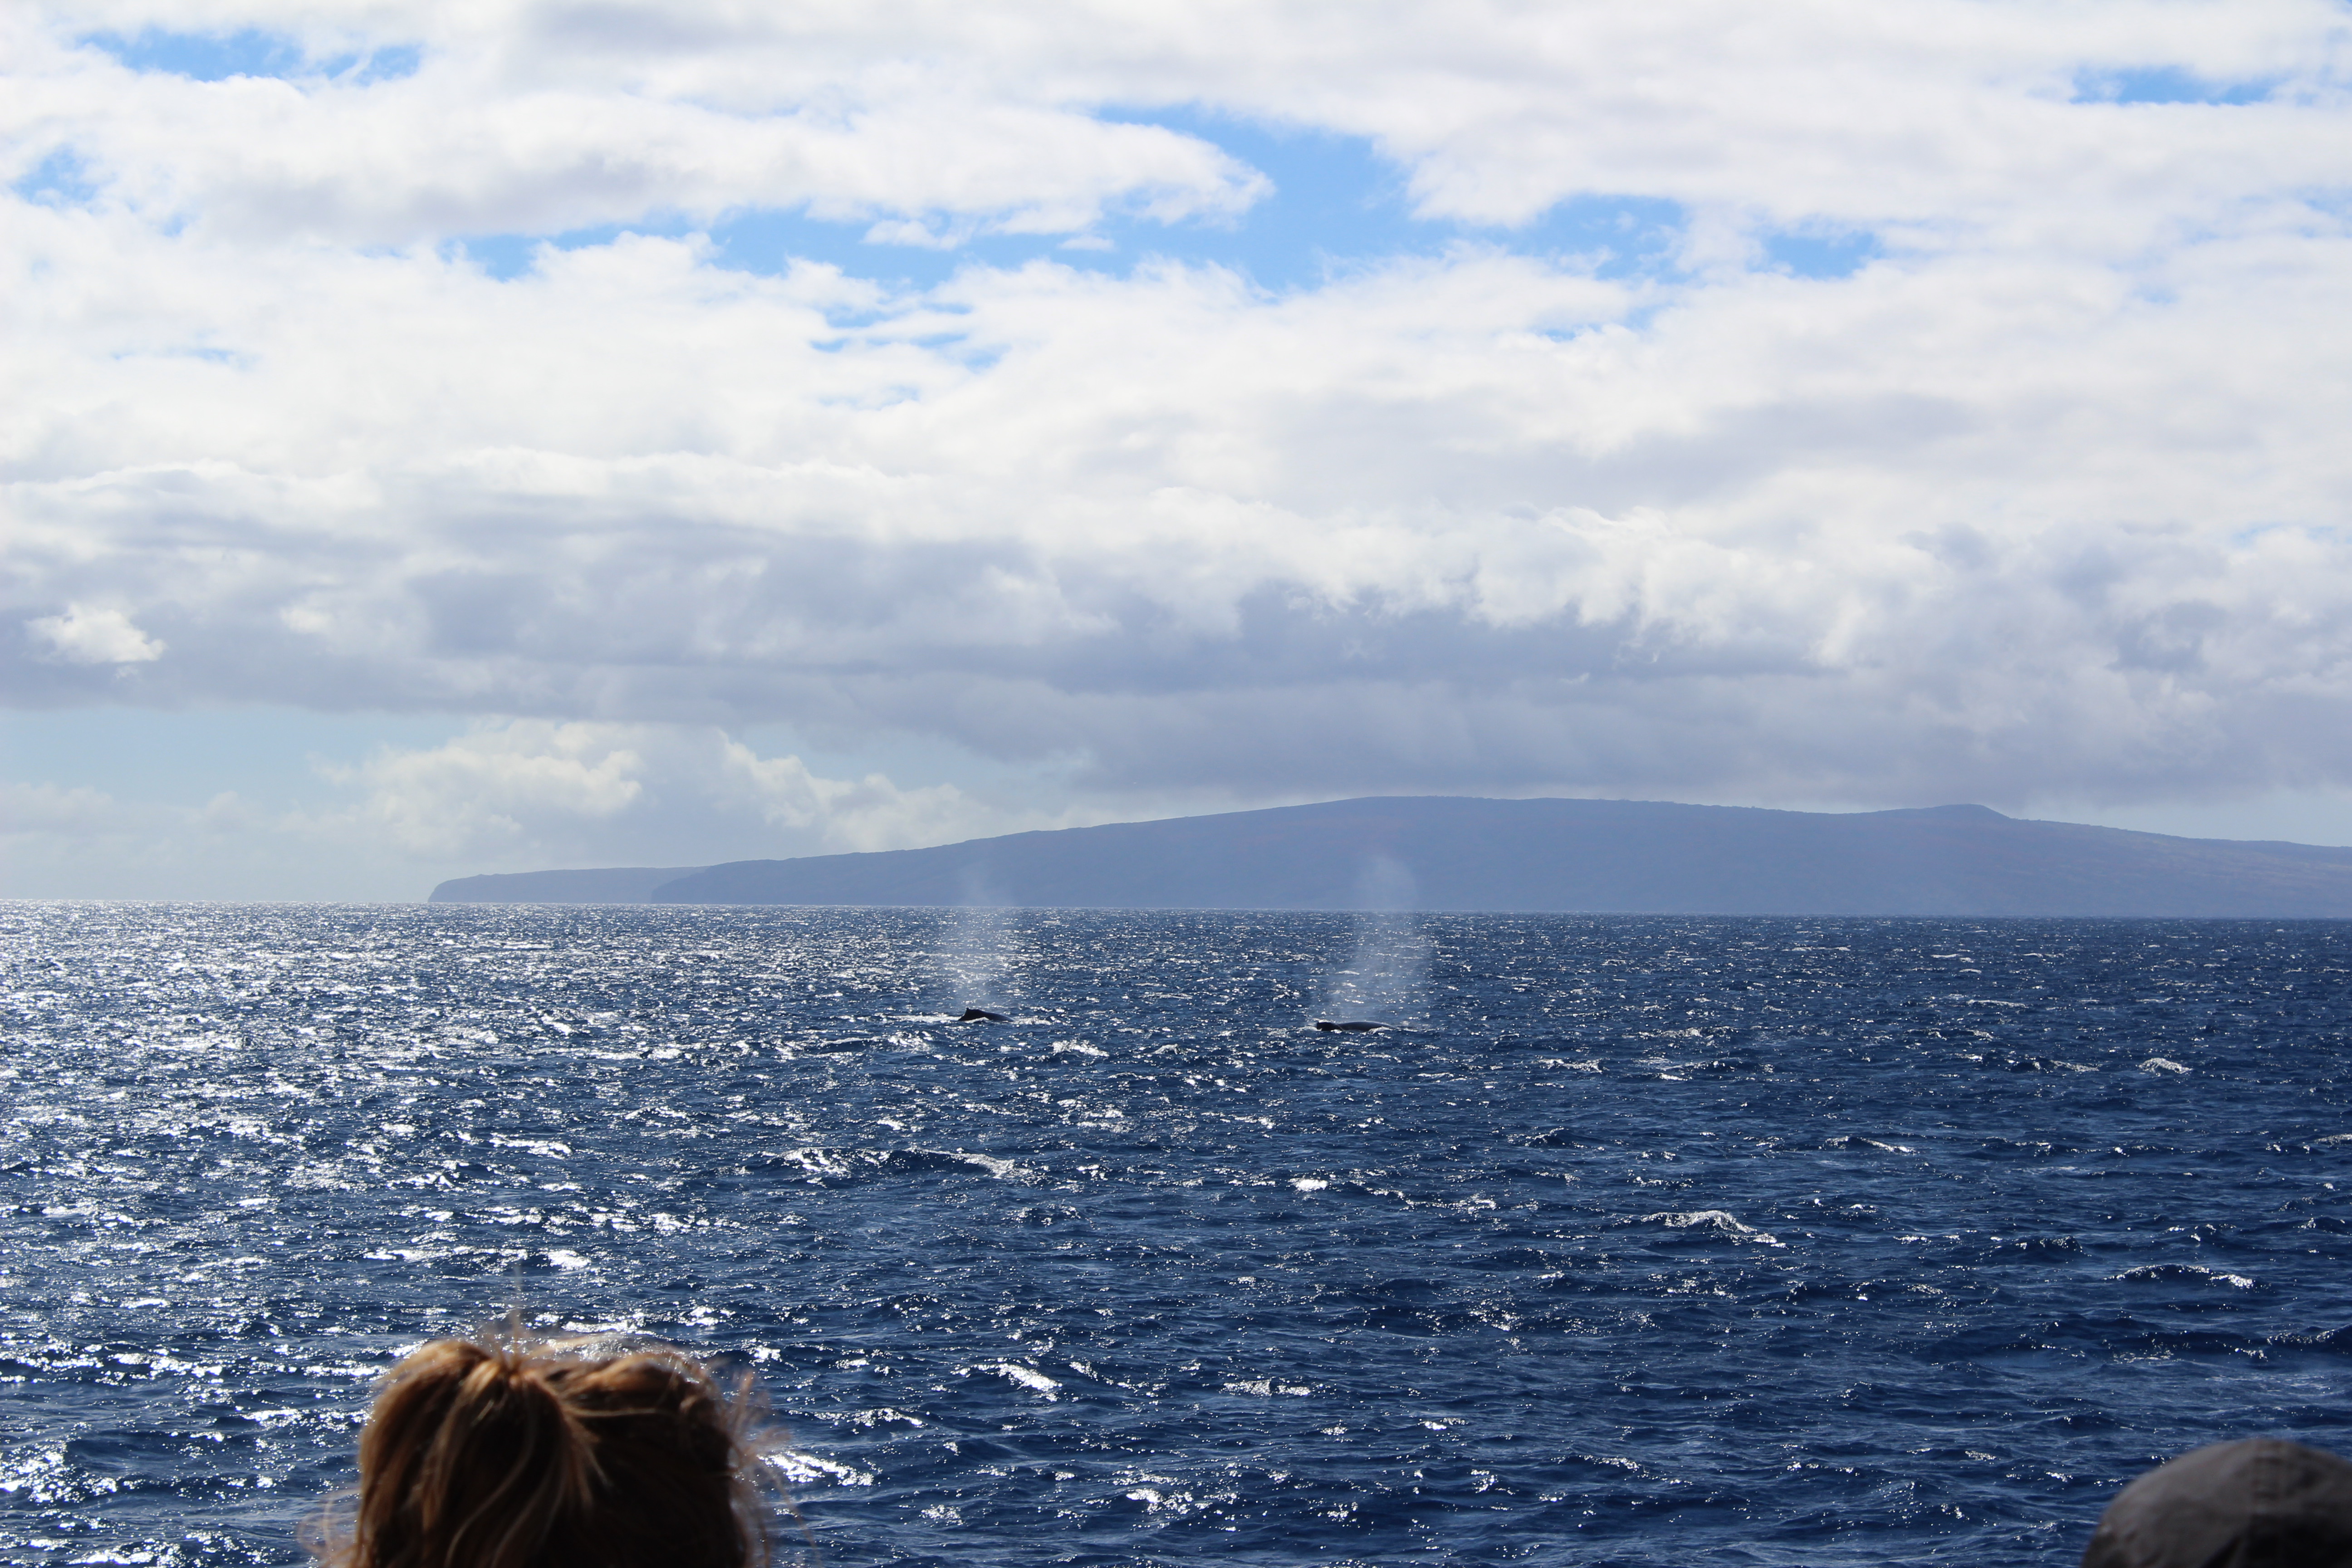 Maui Whale Watching PacWhale Foundation